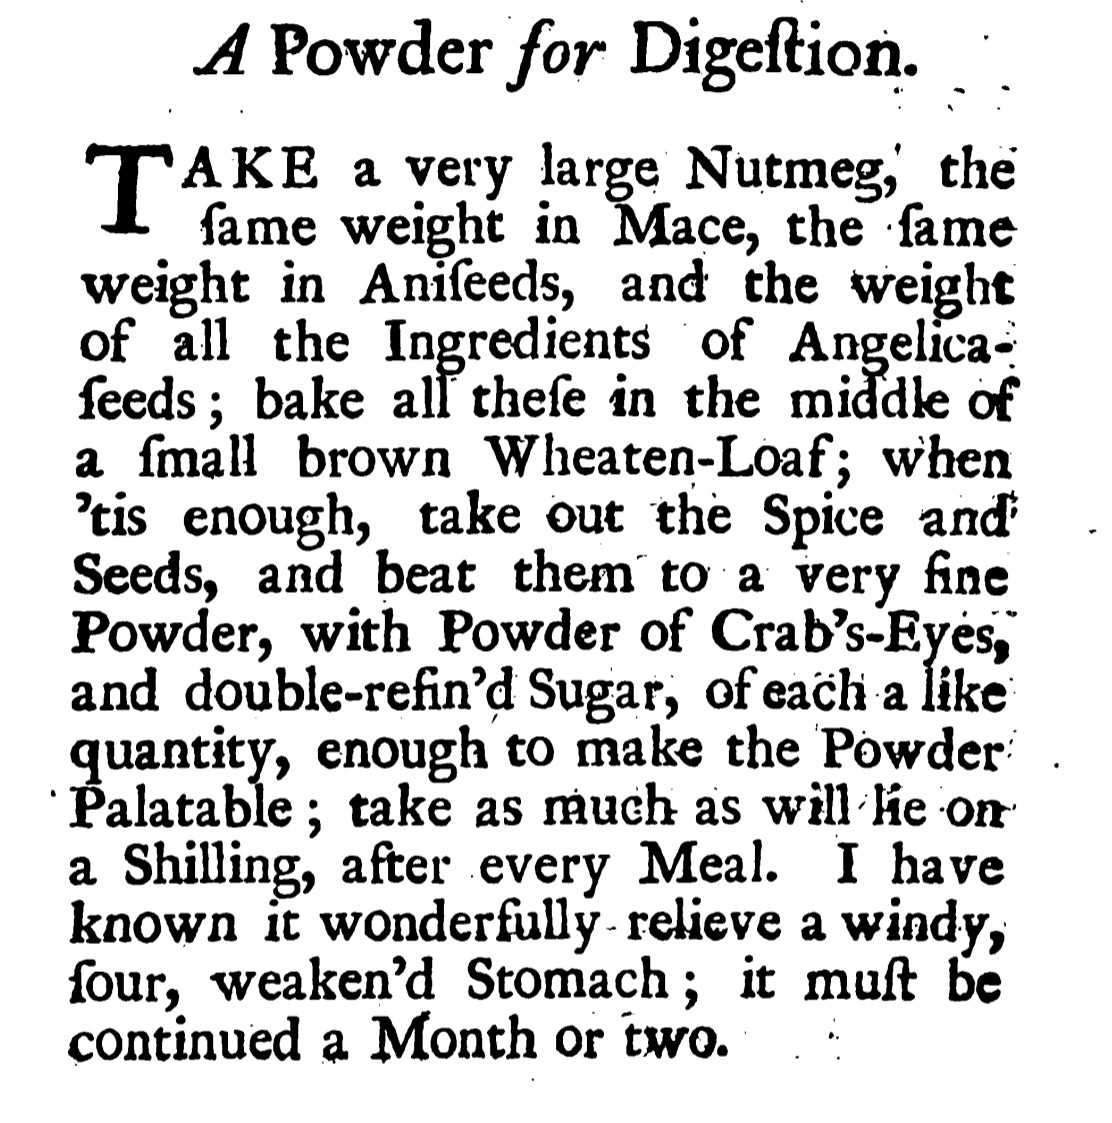 A Powder for Digeſtion. TAKAKE a very large Nutmeg, the ſame weight in Mace, the ſame weight in Aniſeeds, and the weight of all the Ingredients of Angelica feeds; bake all theſe in the middle of a ſmall brown Wheaten -Loaf; when ' tis enough, take out the Spice and Seeds, and beat them to a very fine Powder, with Powder of Crab’s-Eyes, and double-refin'd Sugar, of each a like quantity, enough to make the Powder Palatable ; take as much as will lie on a Shilling, after every Meal. I have known it wonderfully - relieve a windy, four, weaken'd Stomach ; it muſt be continued a Month or two.